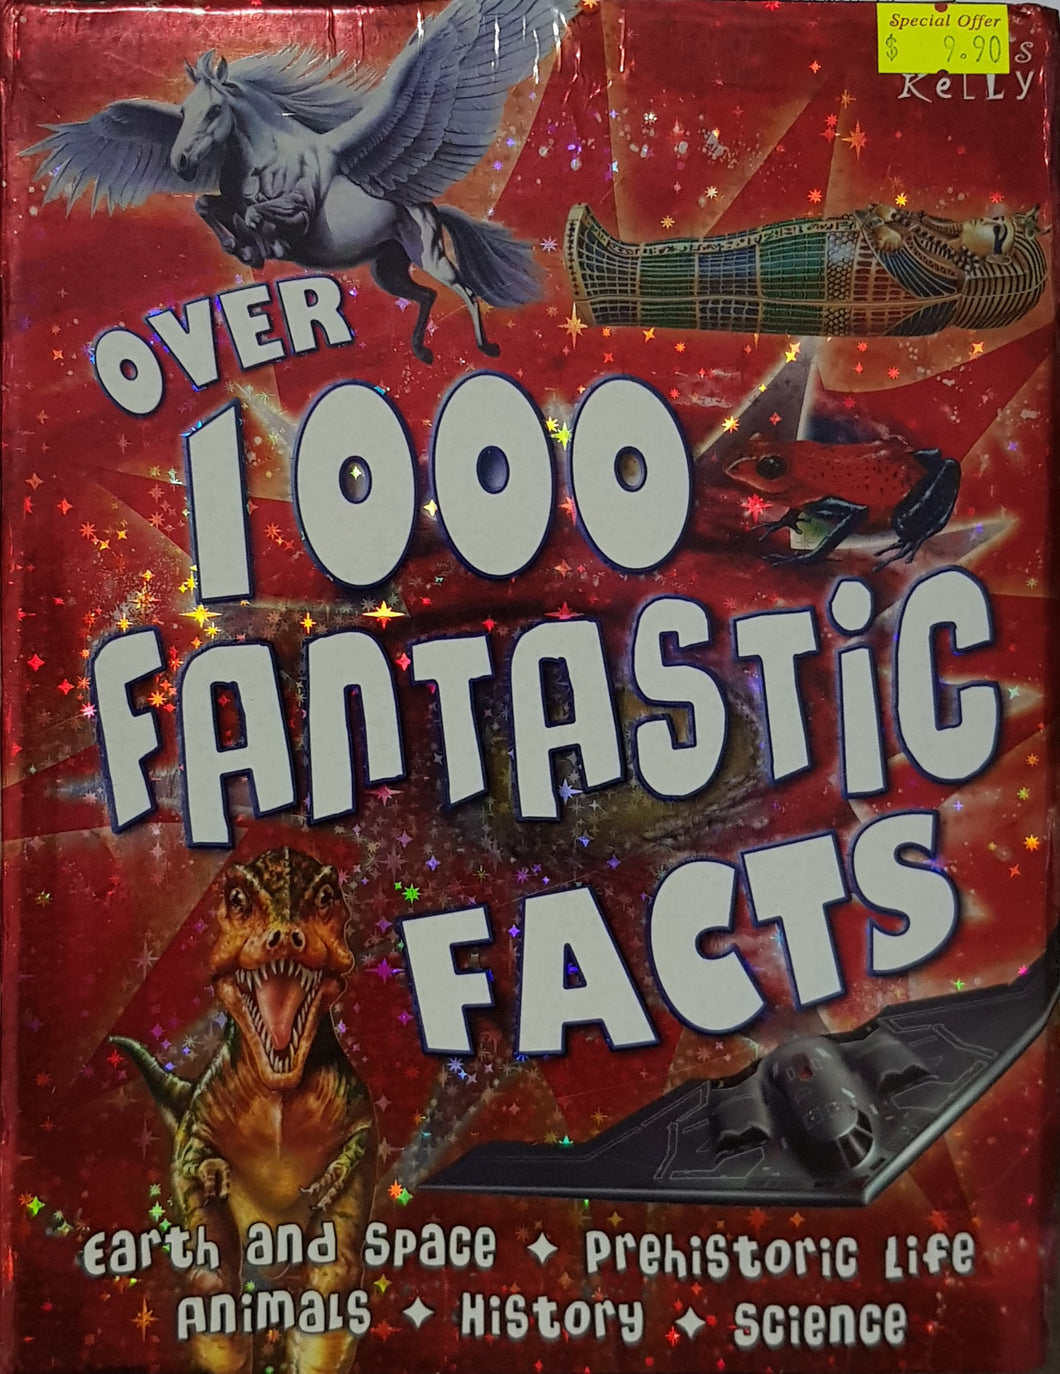 Over 1000 Fantastic Facts - Miles Kelly